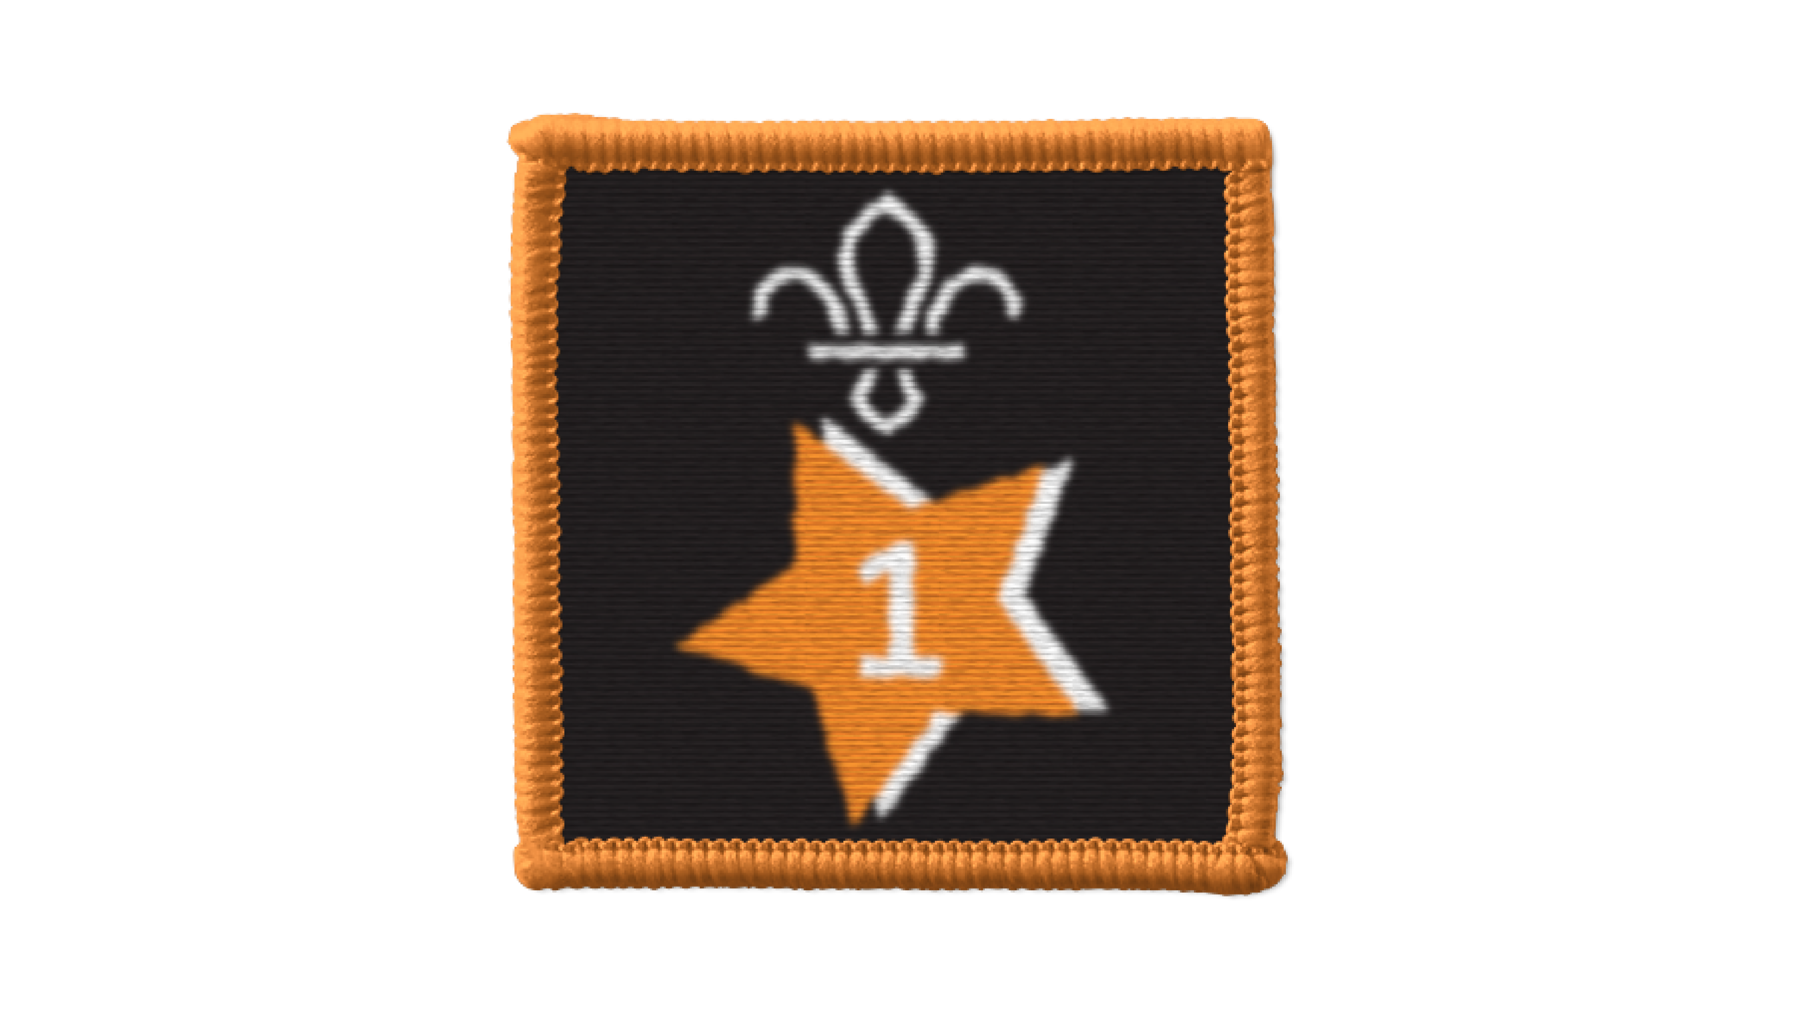 The textured badge image for the Joining In Award.